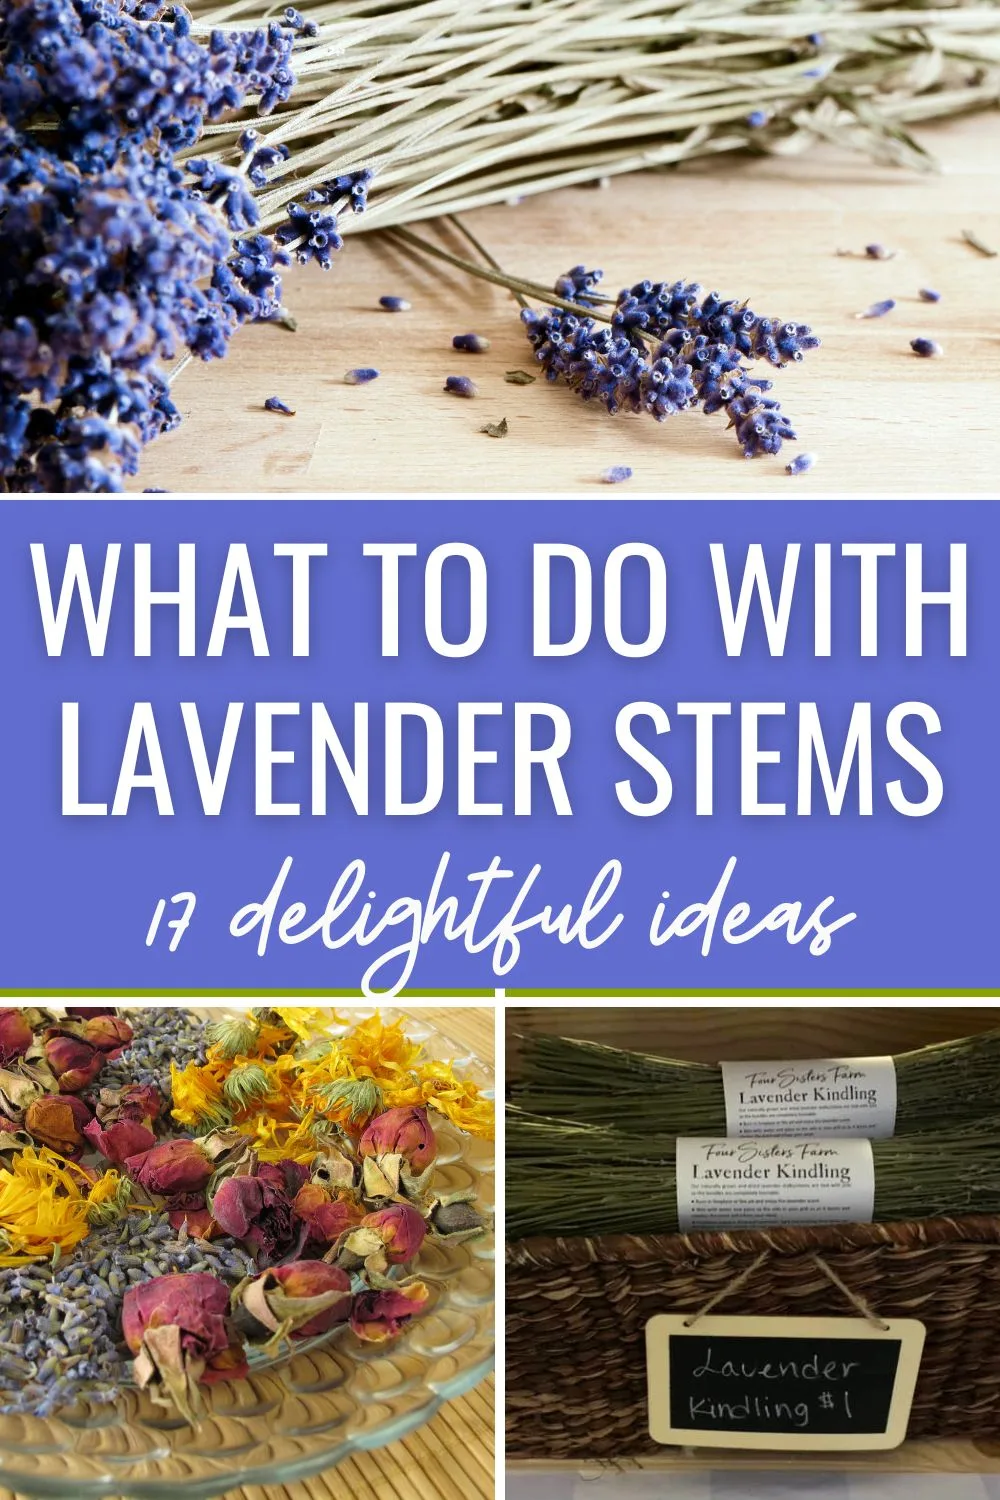 What to do with lavender stems.